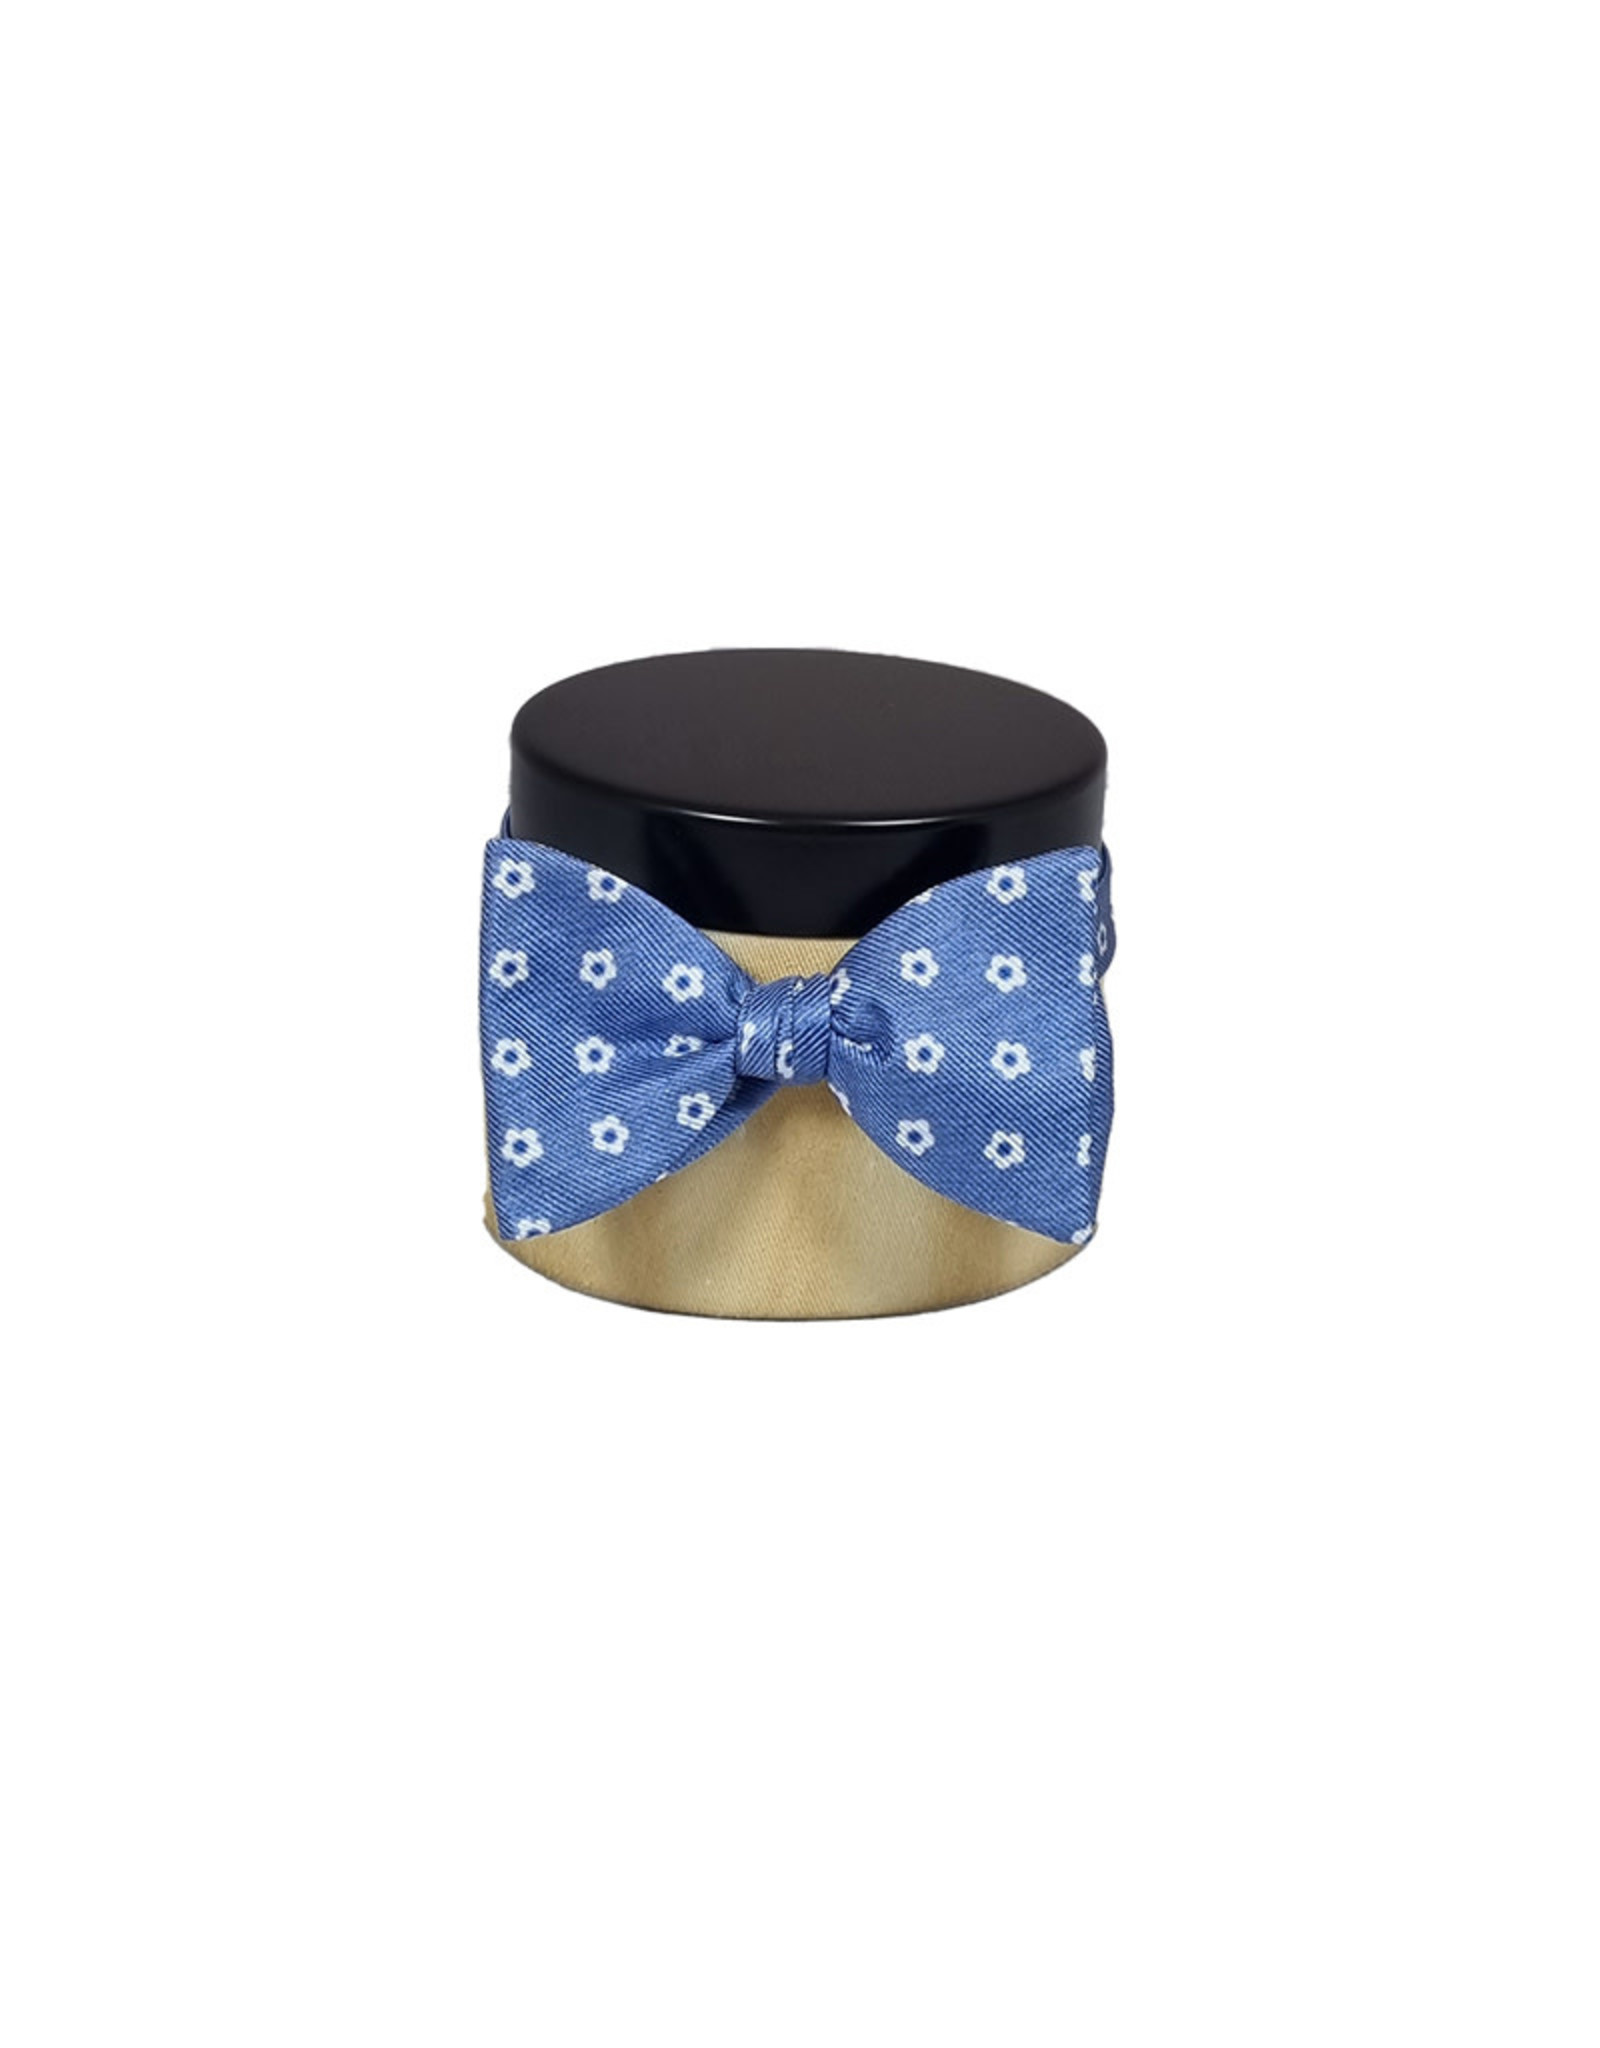 Calabrese Calabrese bow tie light blue-white flowers